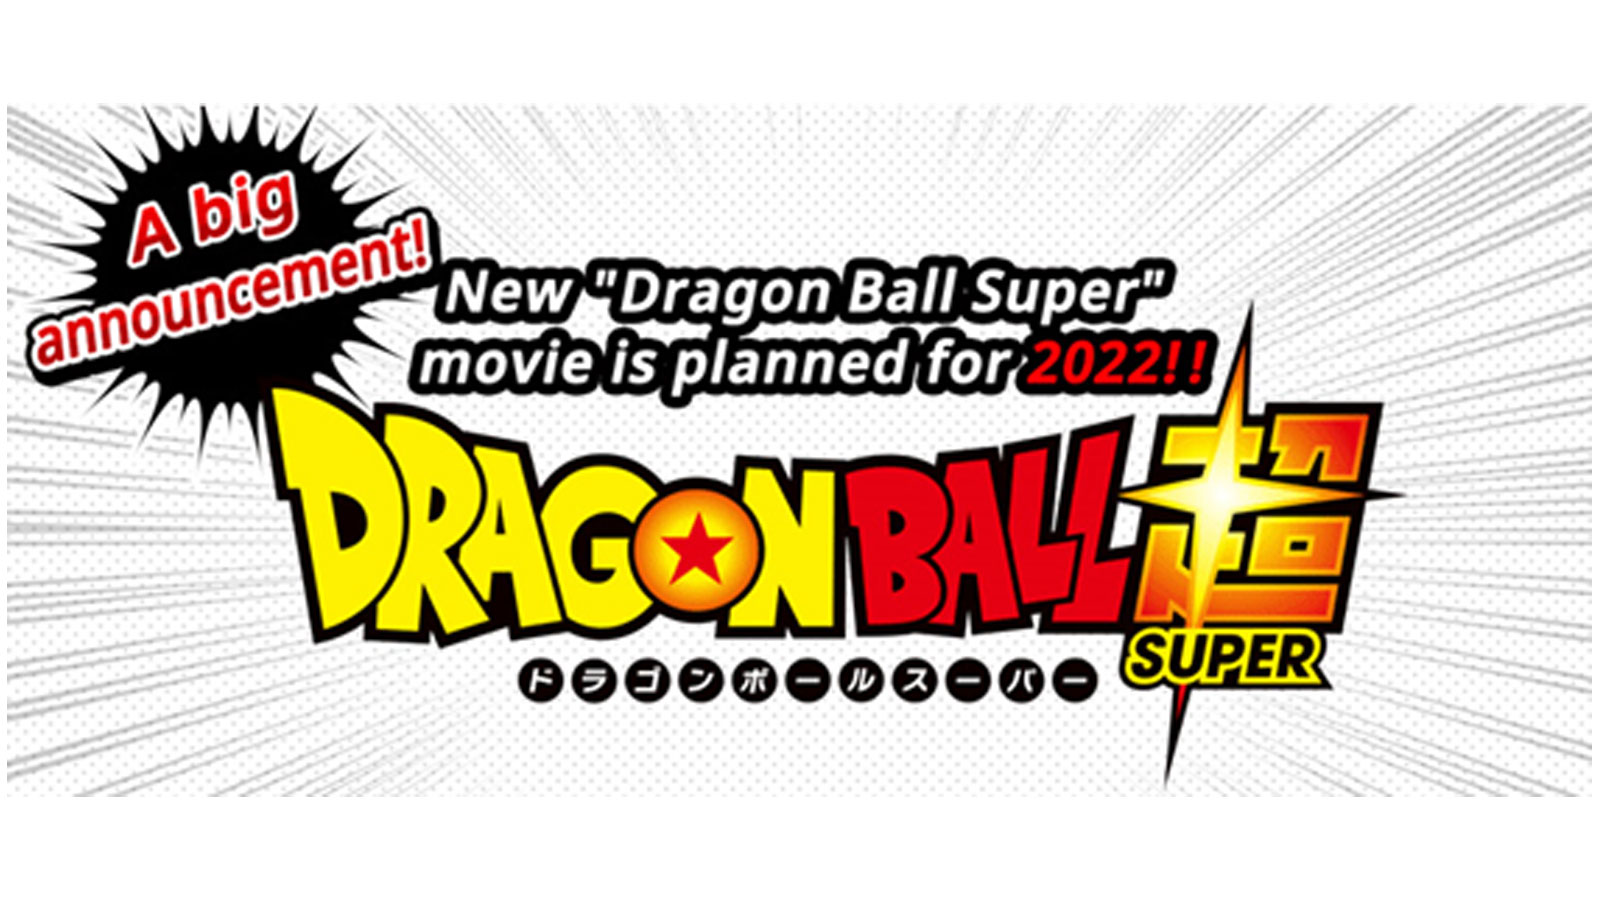 TOEI ANIMATION MAKES SPECIAL ANNOUNCEMENT OF NEW “DRAGON BALL SUPER” MOVIE IN 2022